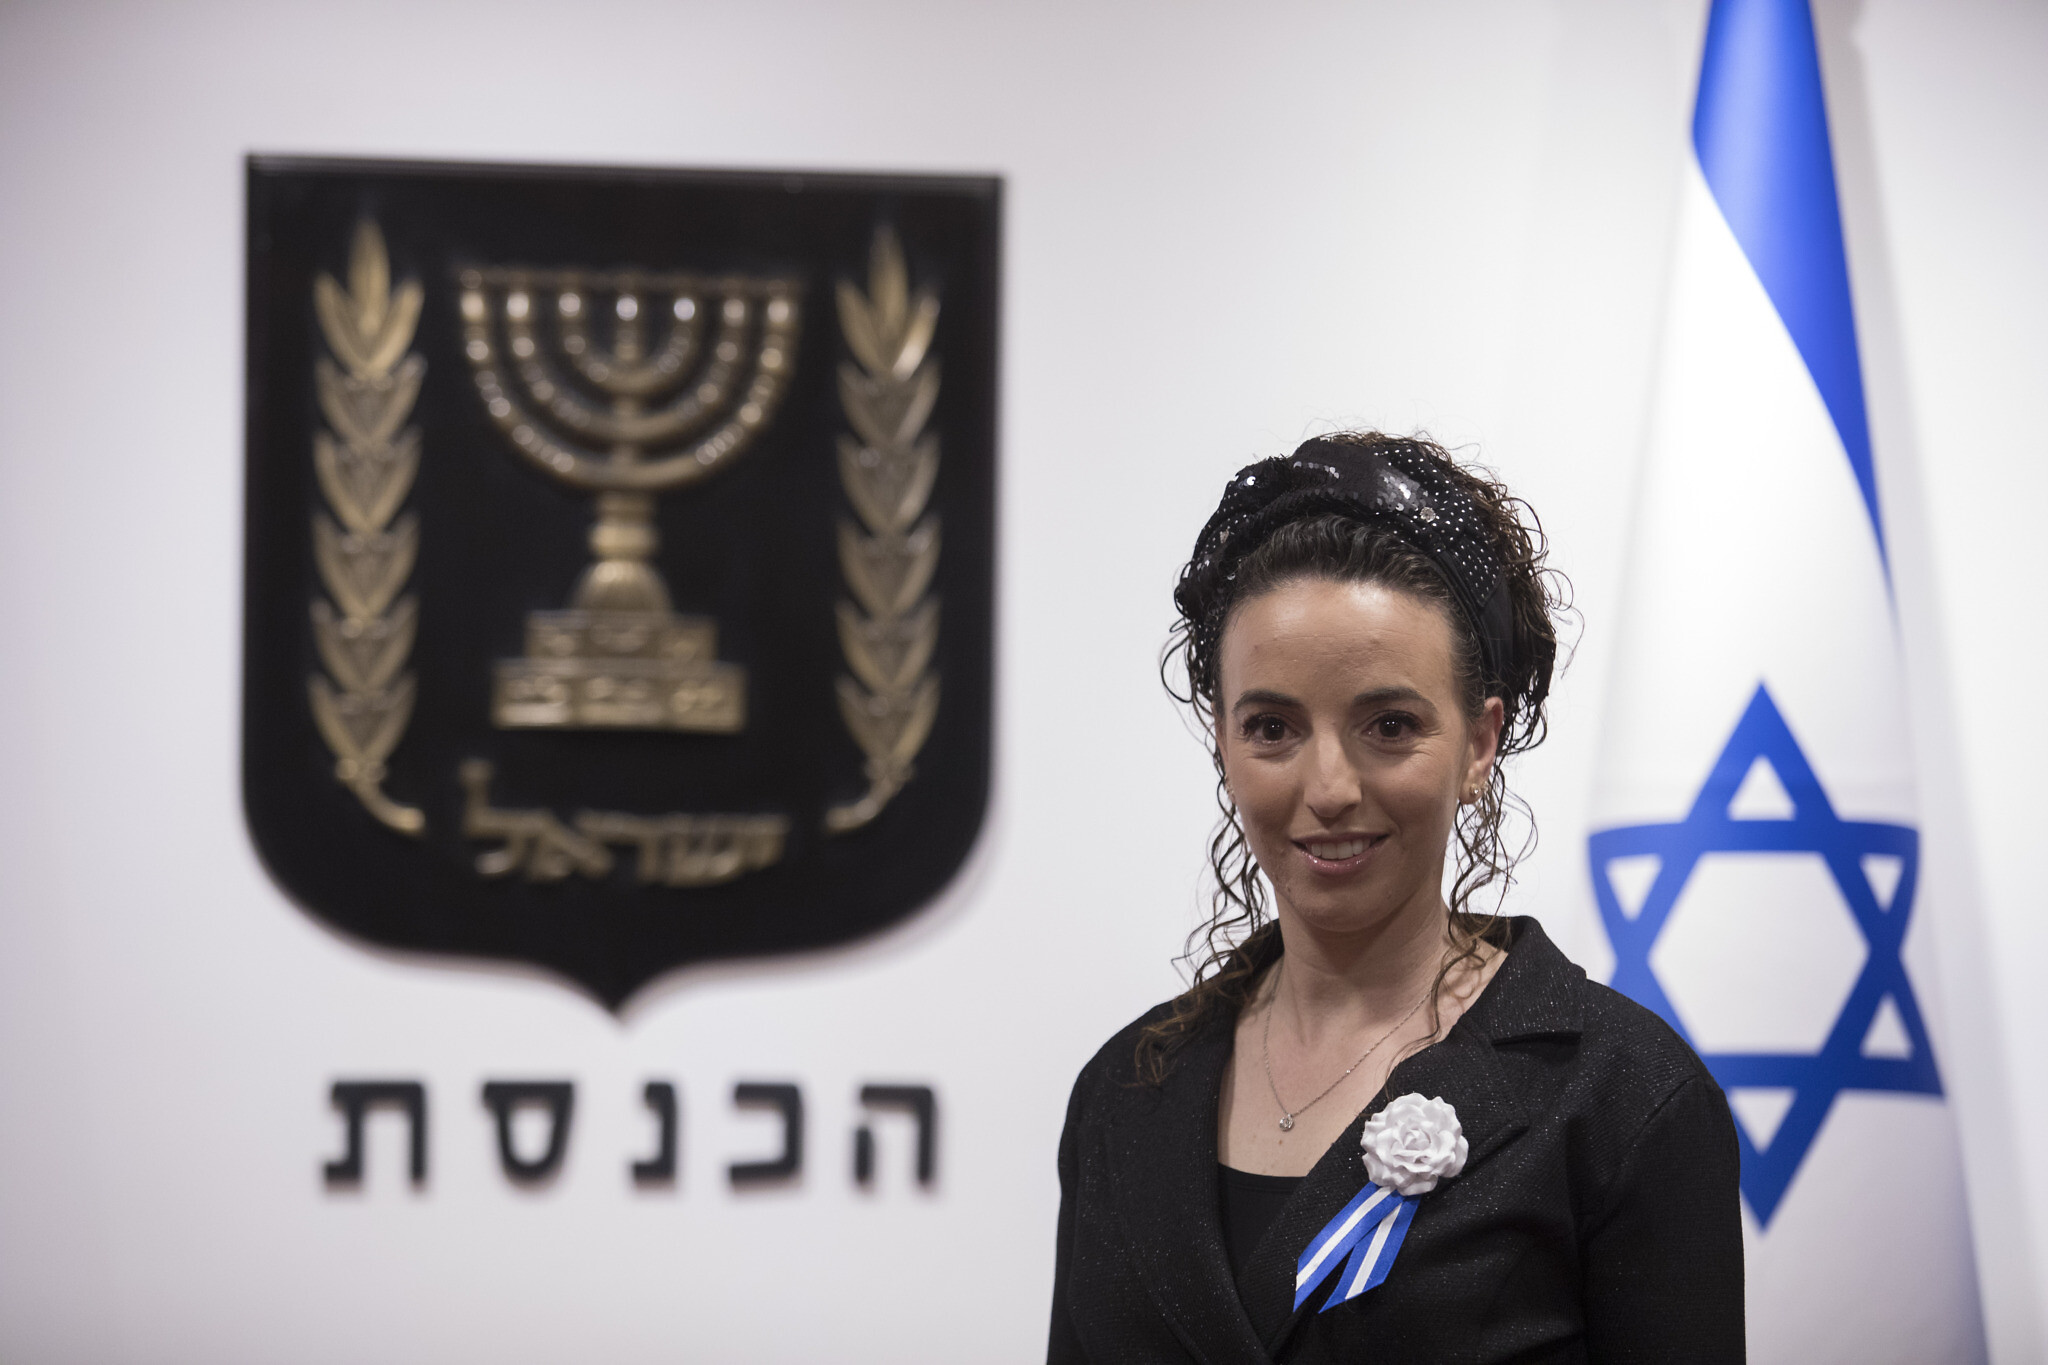 Israel’s Ruling Coalition on brink of collapse as Whip Quits